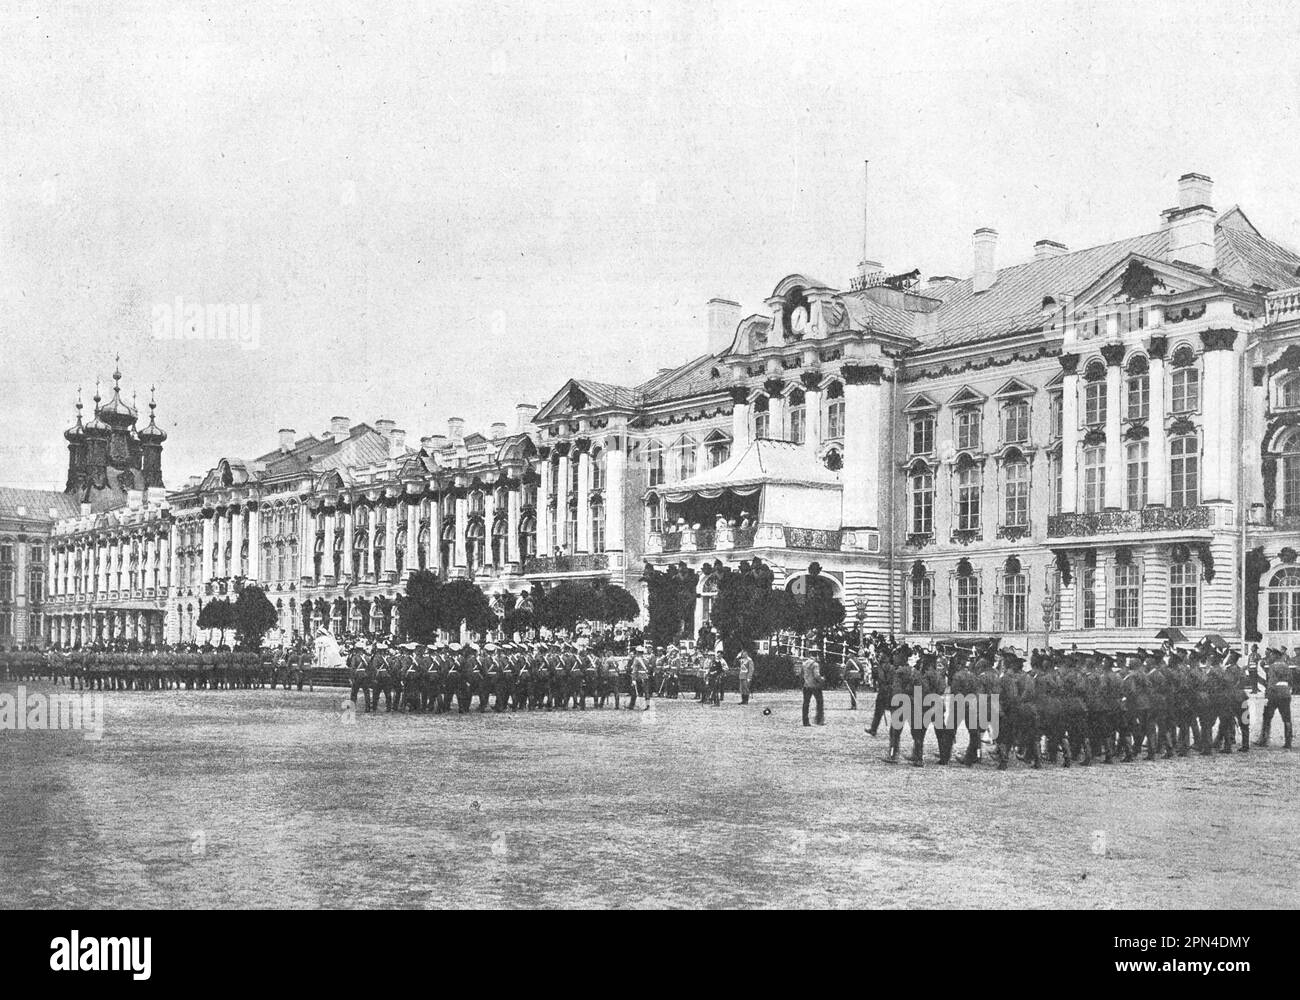 The passage of troops in a ceremonial march during the celebration of the 200th anniversary of the founding of Tsarskoye Selo on June 24, 1910. Photo from 1910. Stock Photo